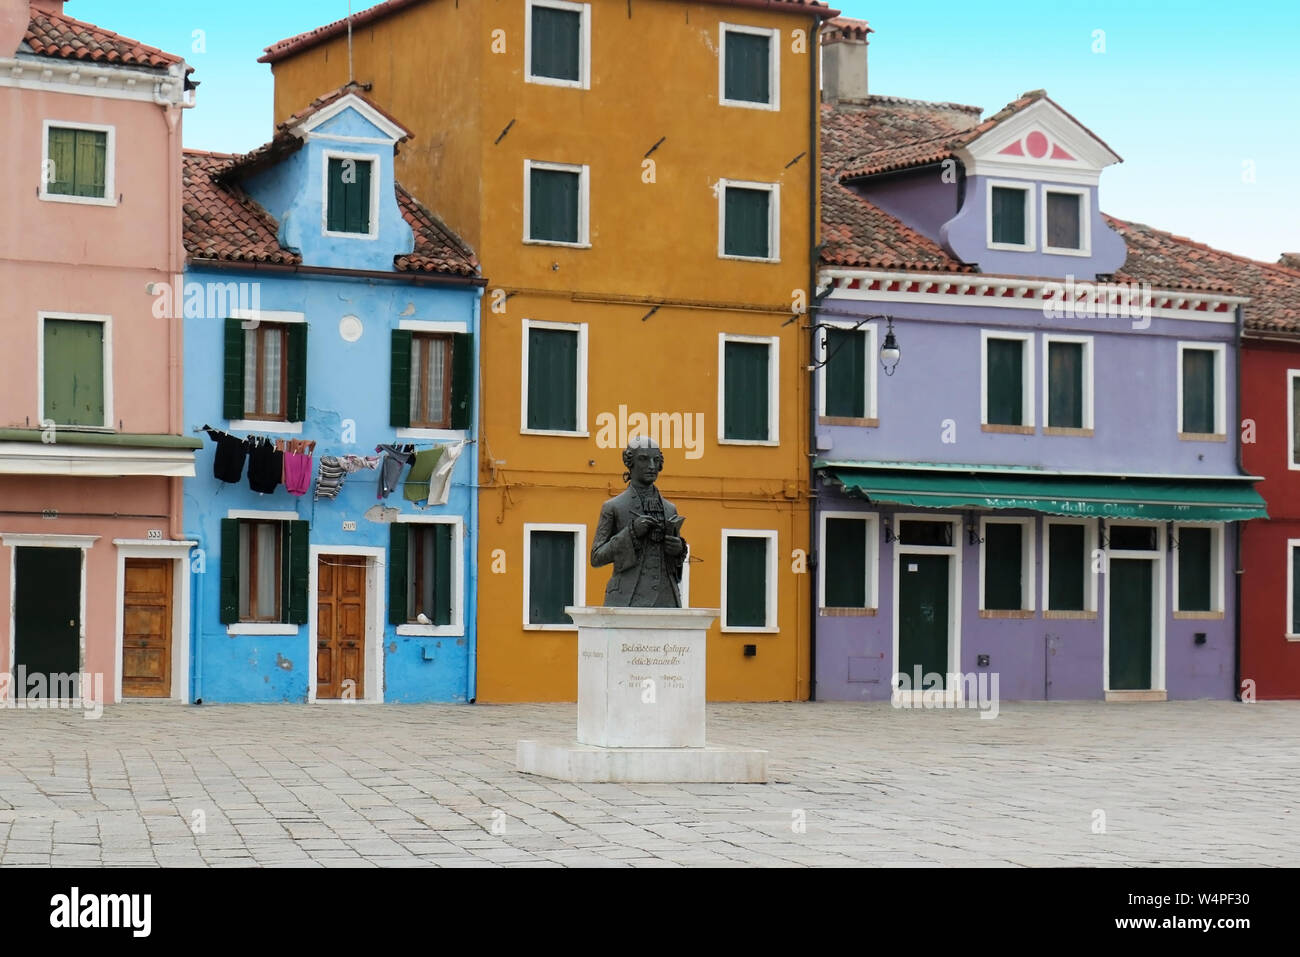 Burano, Italy - January 10, 2017; The statue of Venetian composer Baldassare Galuppi in the main square of Burano island with famous retro houses Stock Photo